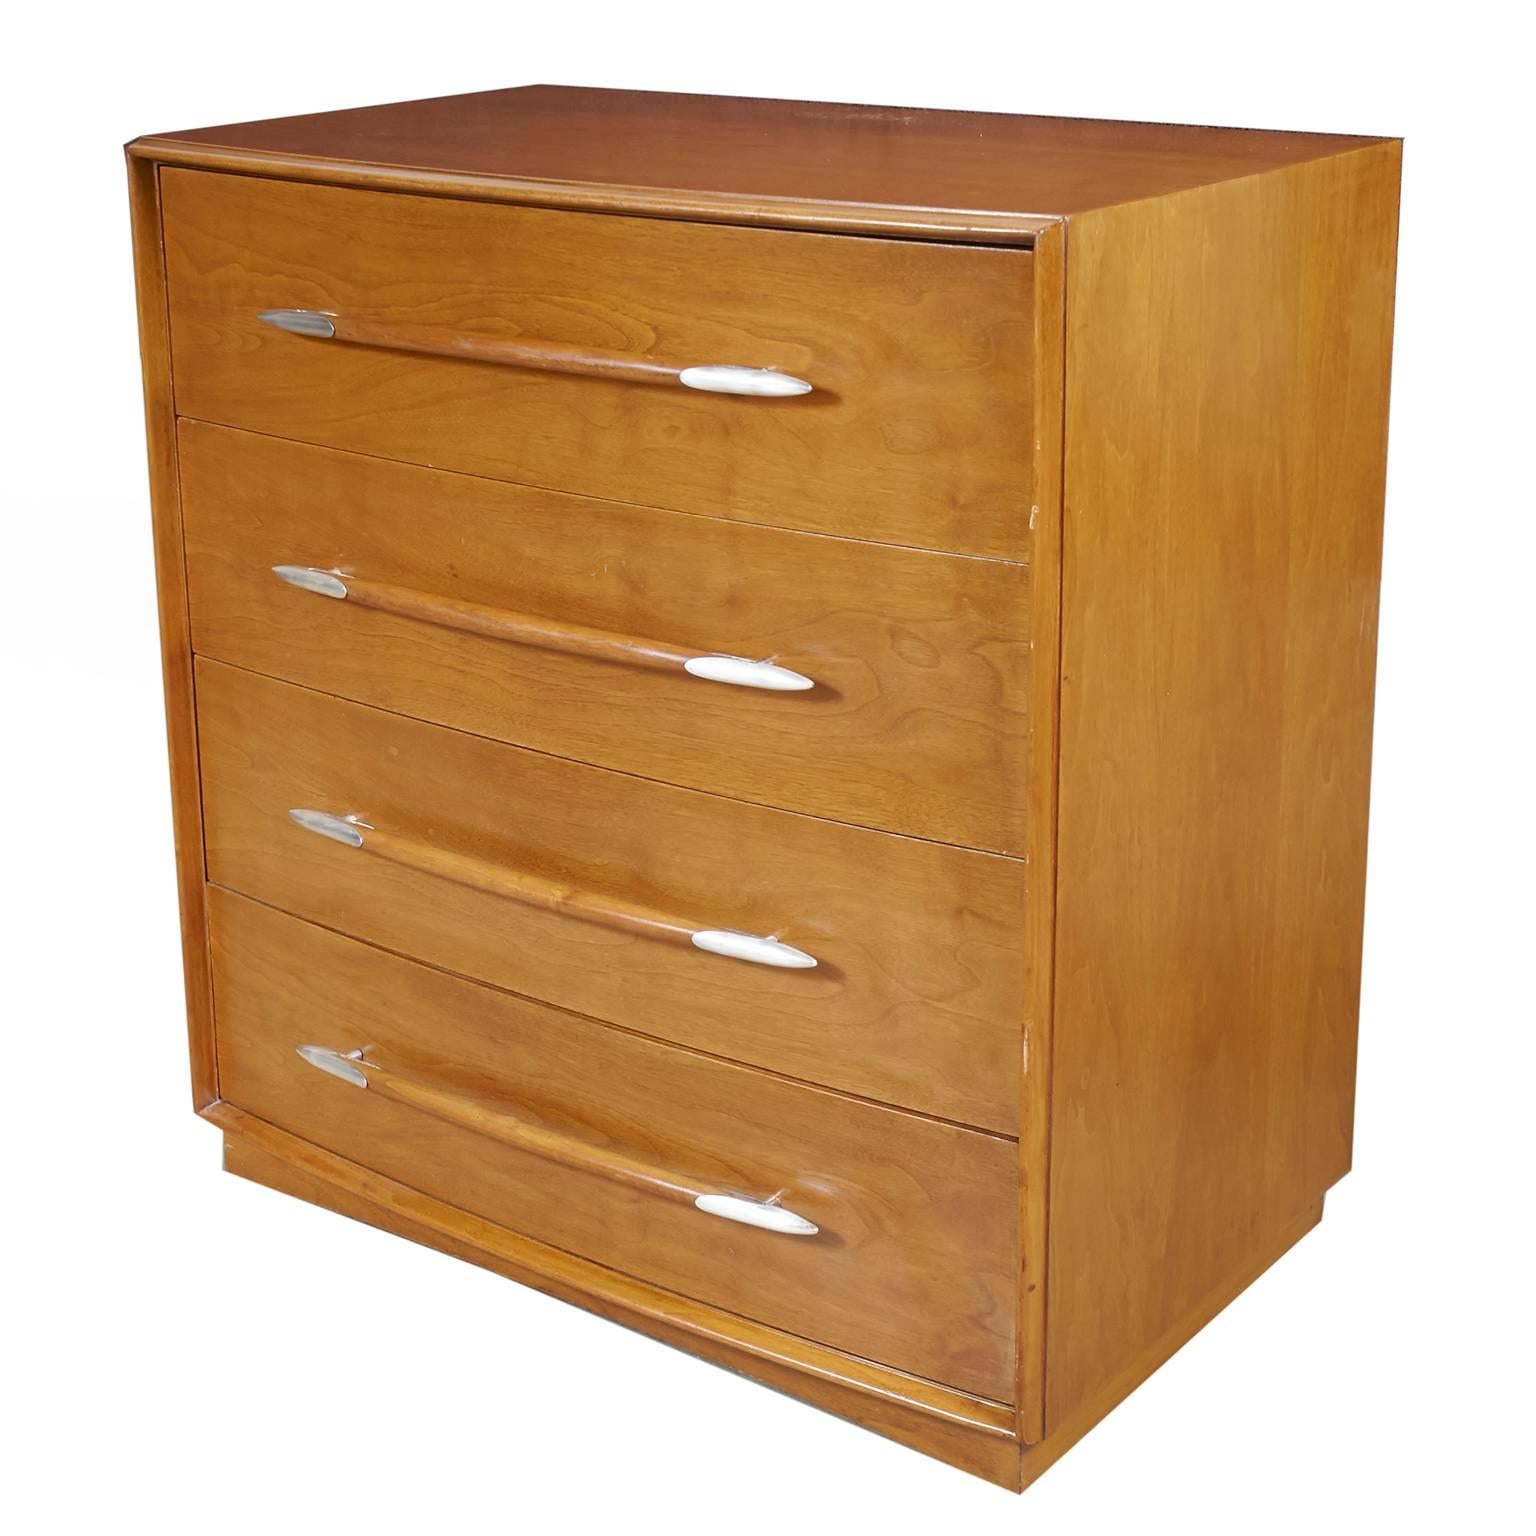 T.H. Robsjohn-Gibbings chest of drawers for Widdicomb four-drawer dresser.
Lightly refinished walnut retaining original patina and color. Hardware pulls have silver plated tips.